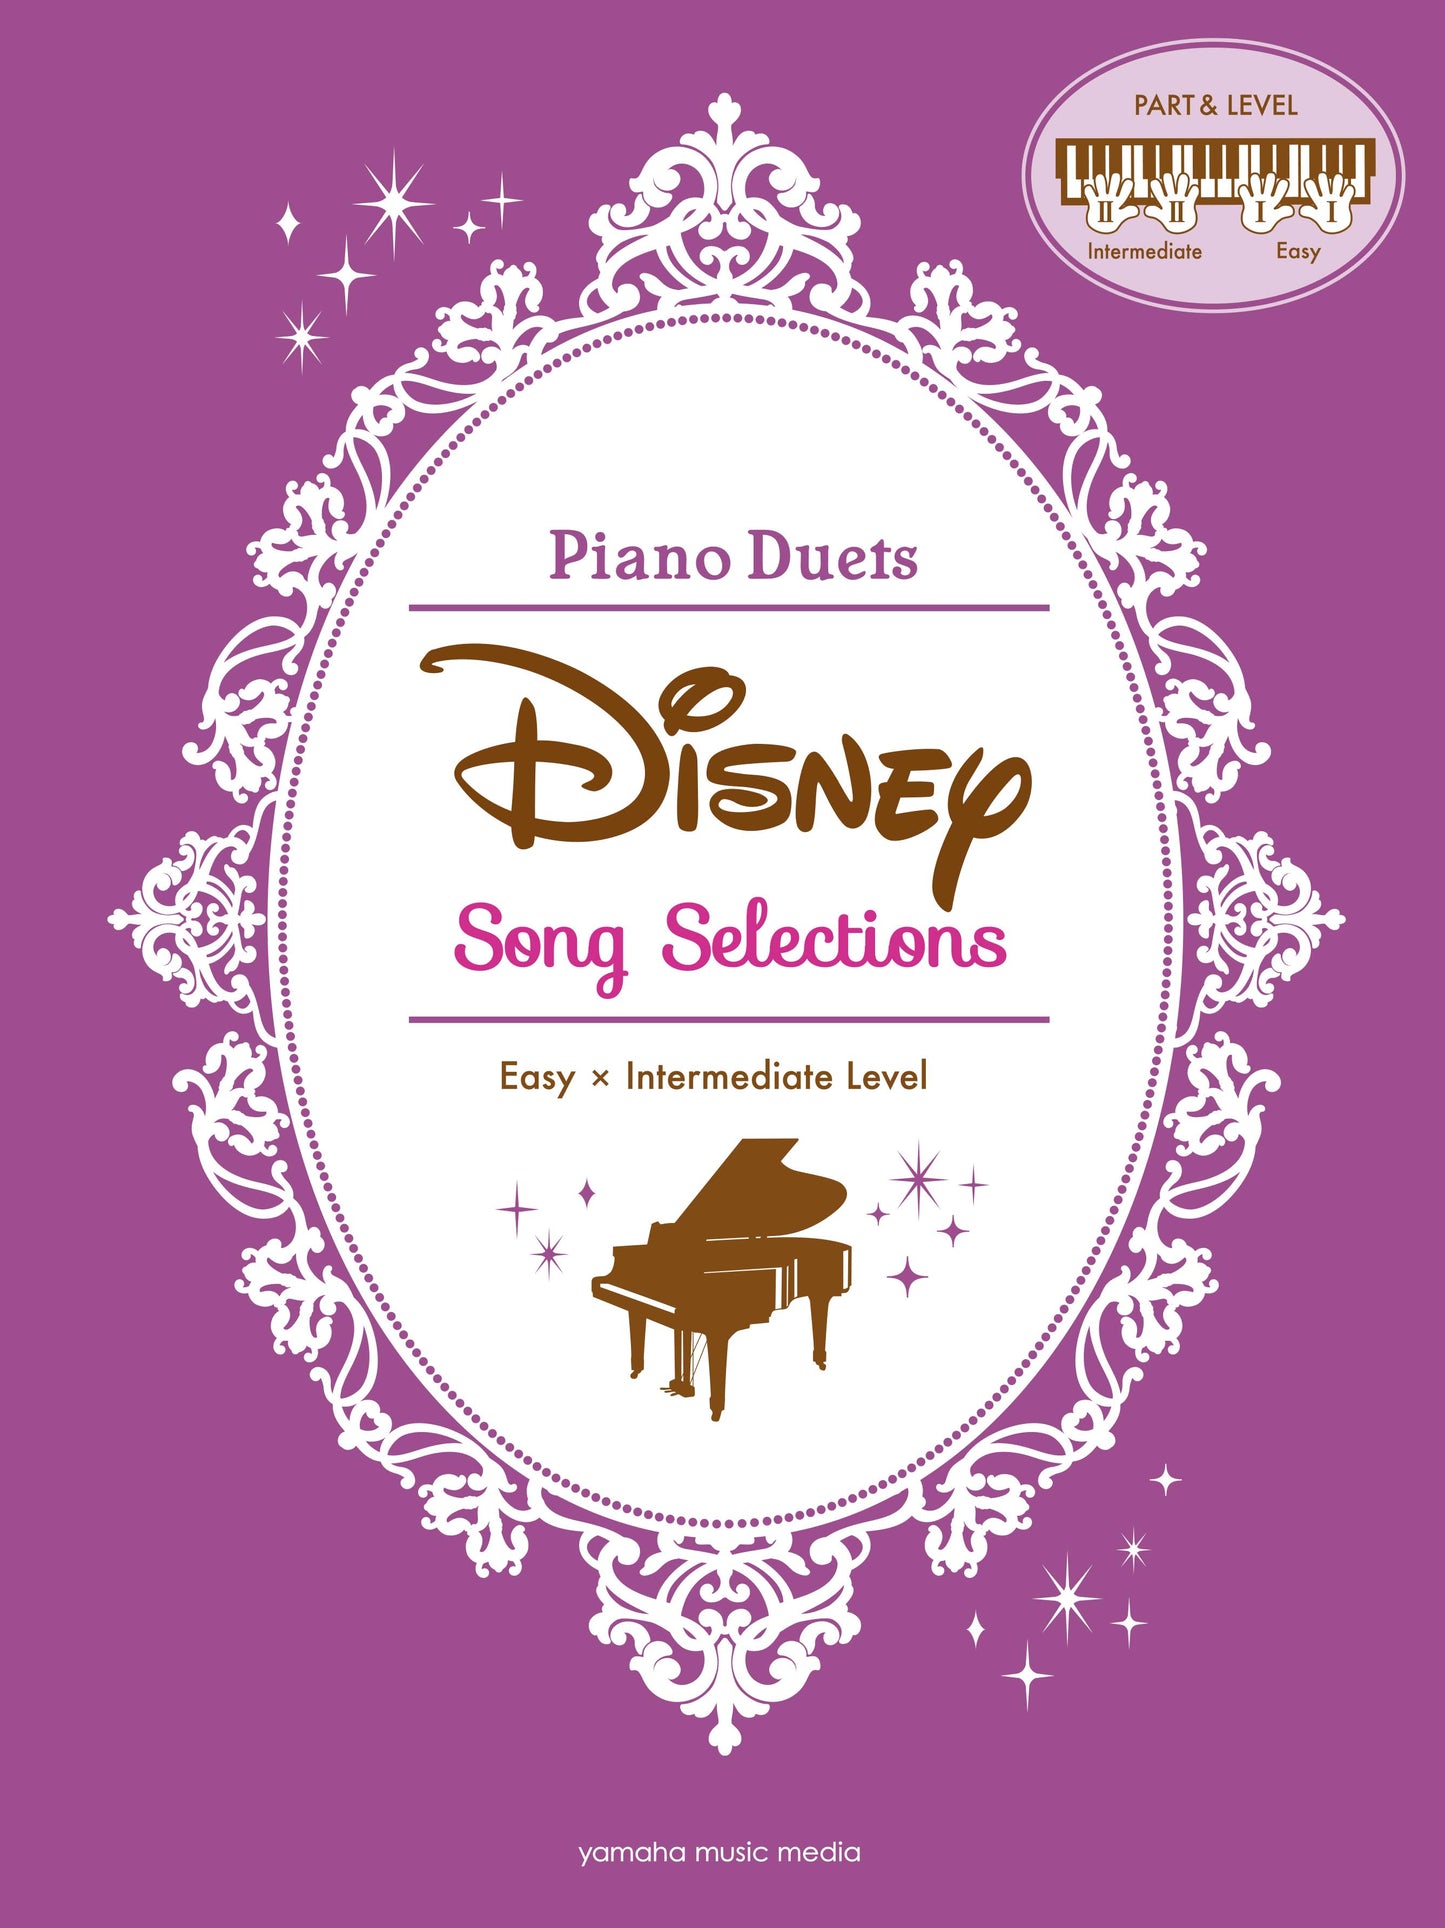 Disney Song Selections for Piano Duet2 in Easy and Intermediate Level/English Version